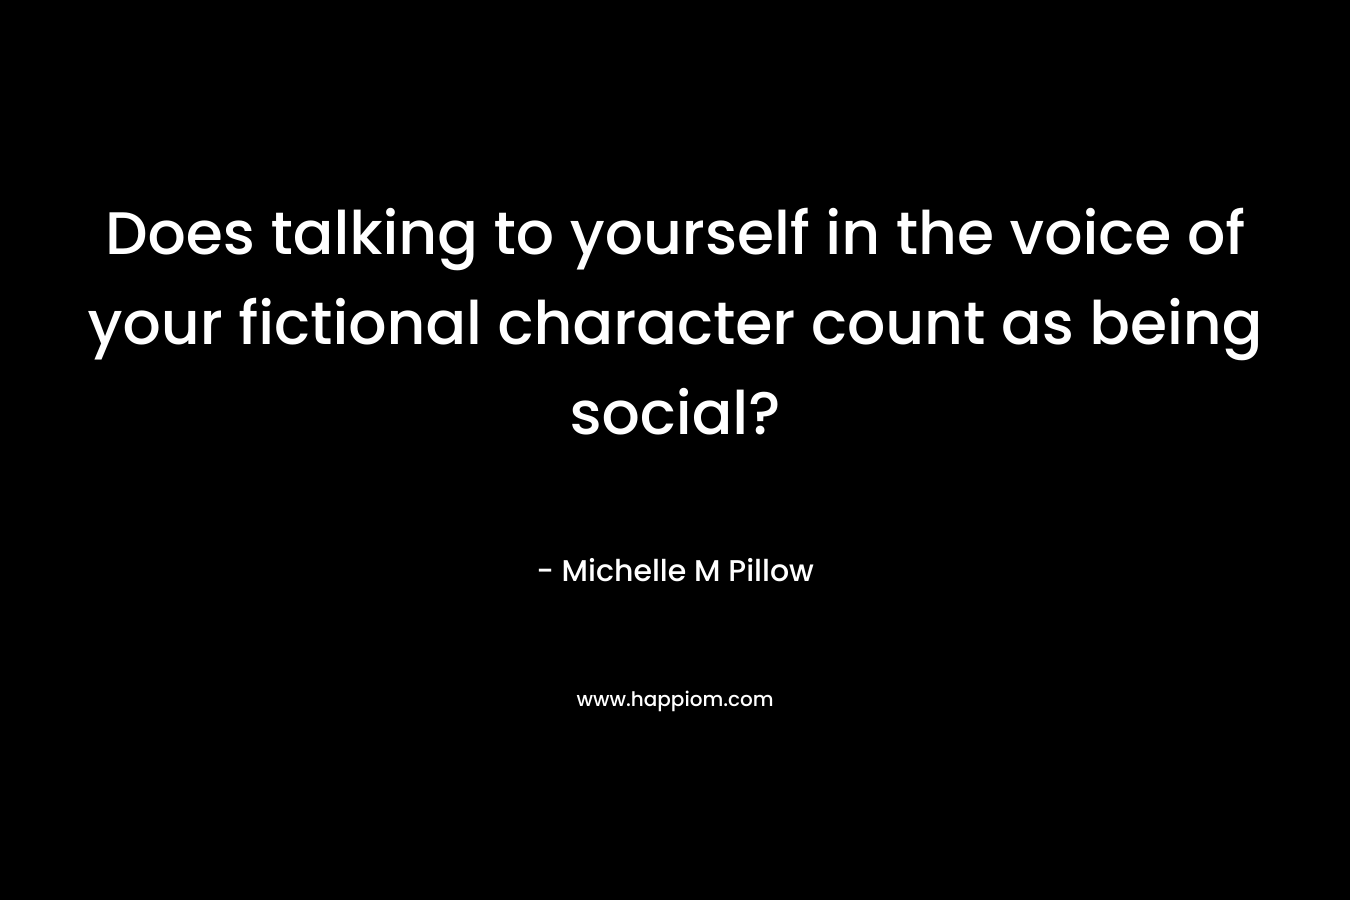 Does talking to yourself in the voice of your fictional character count as being social?